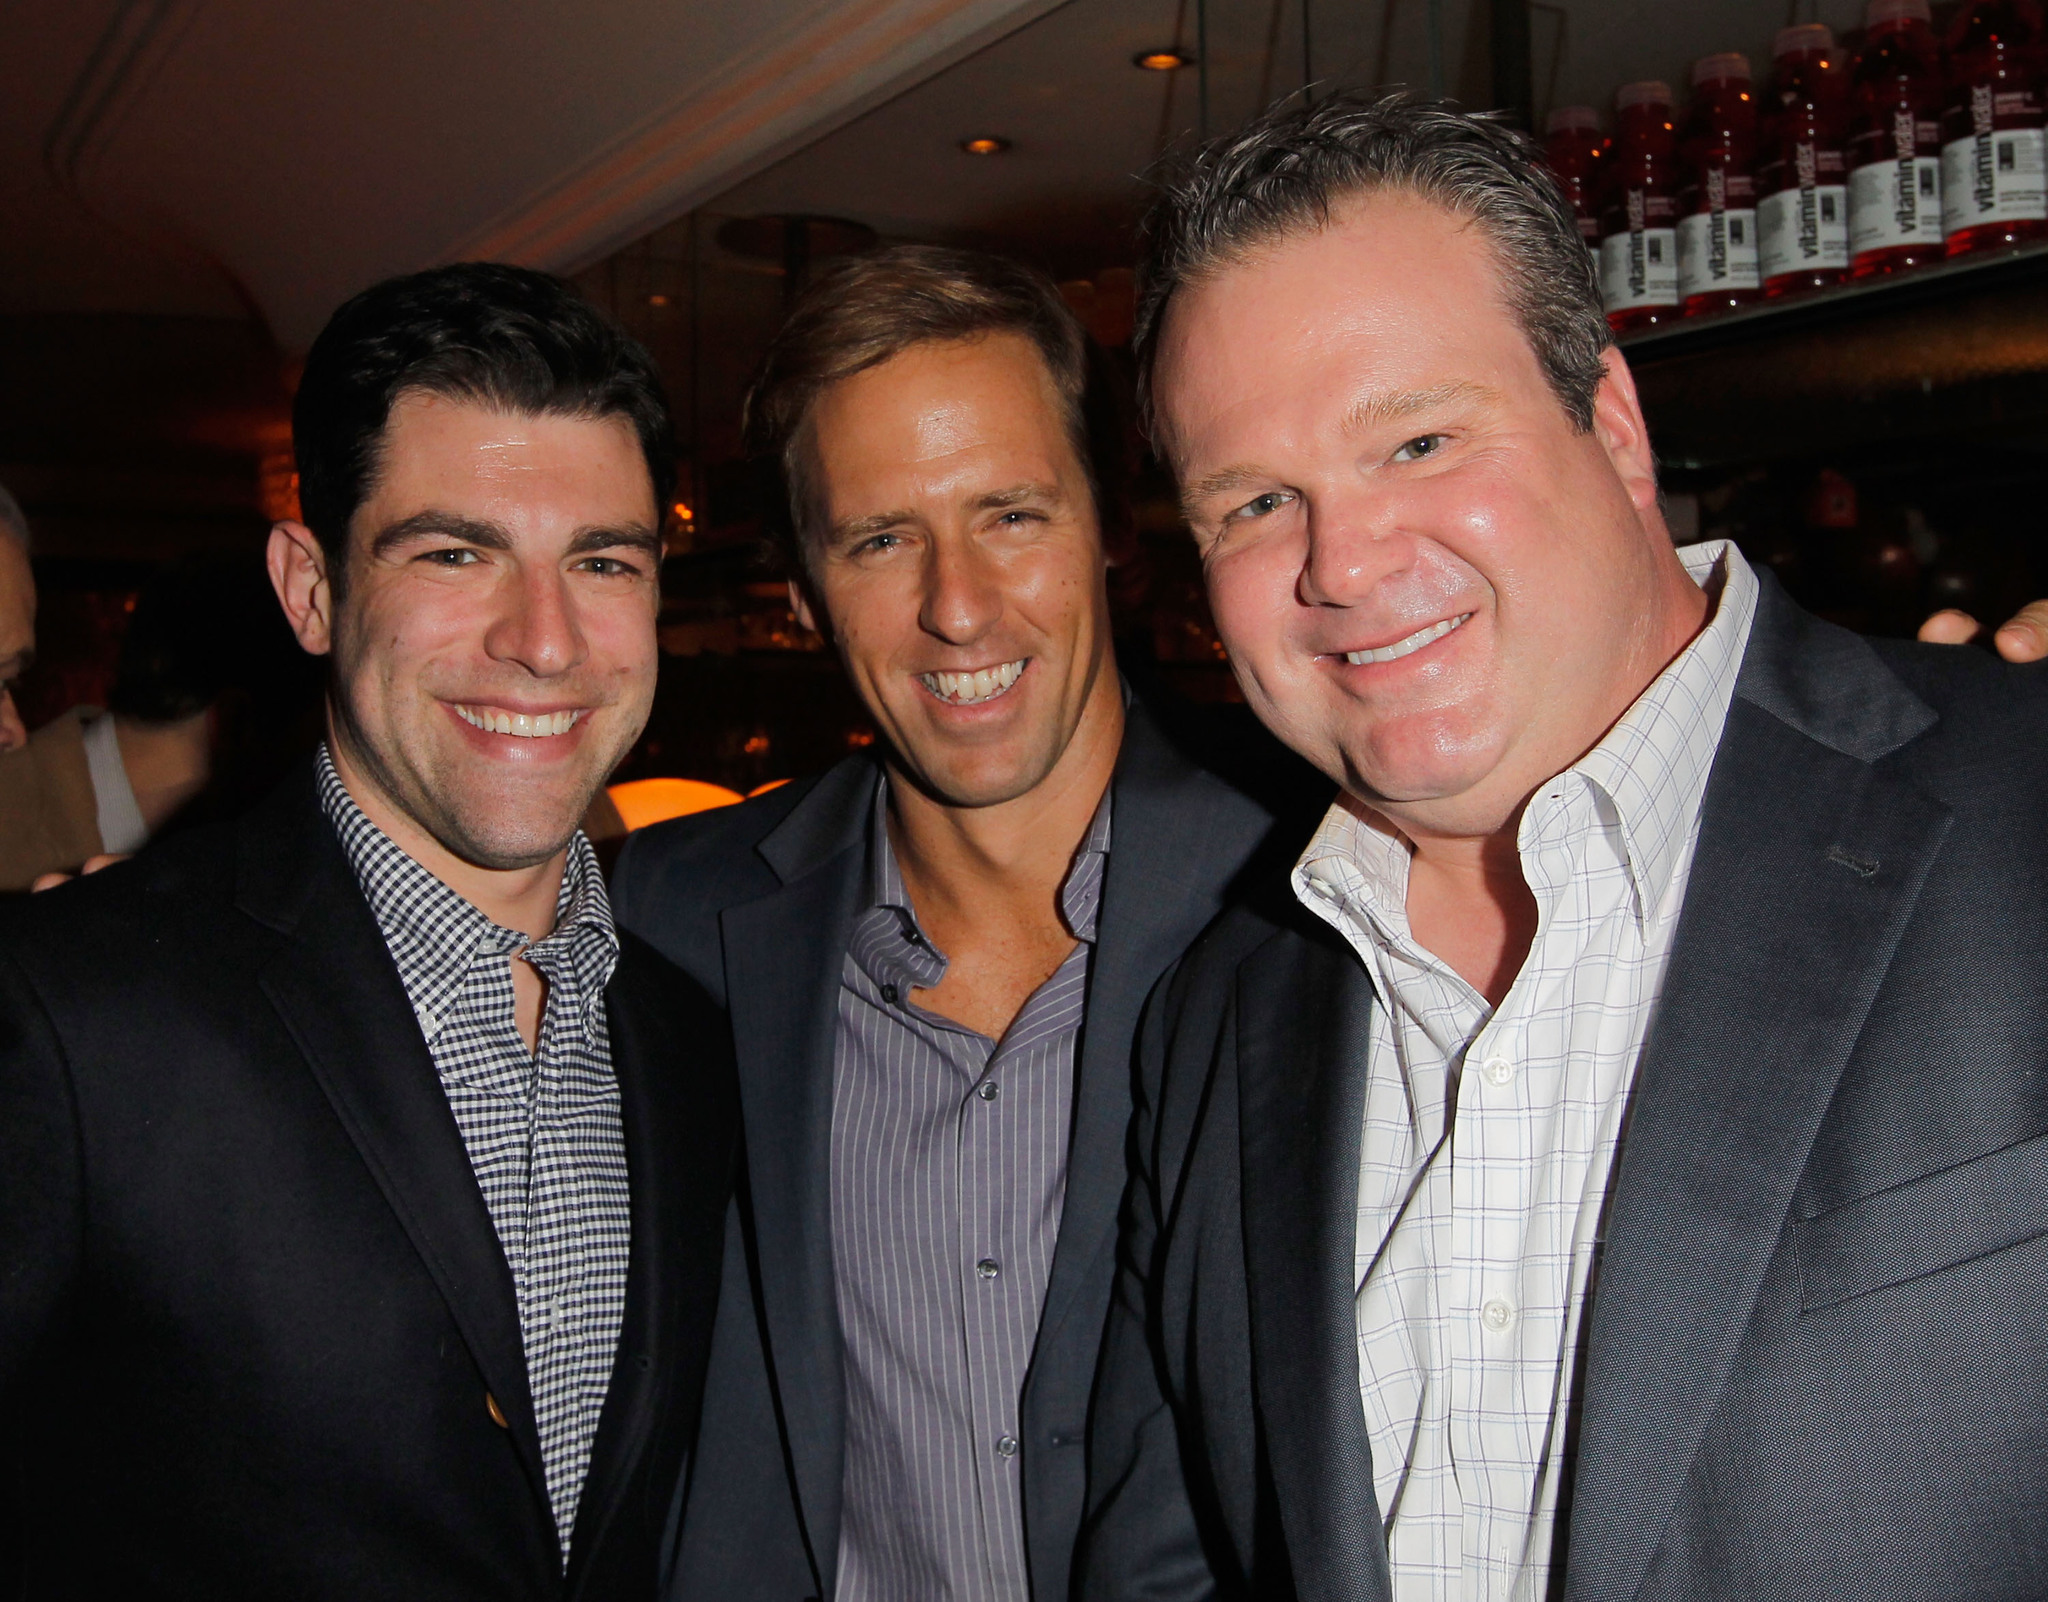 Nat Faxon, Max Greenfield and Eric Stonestreet